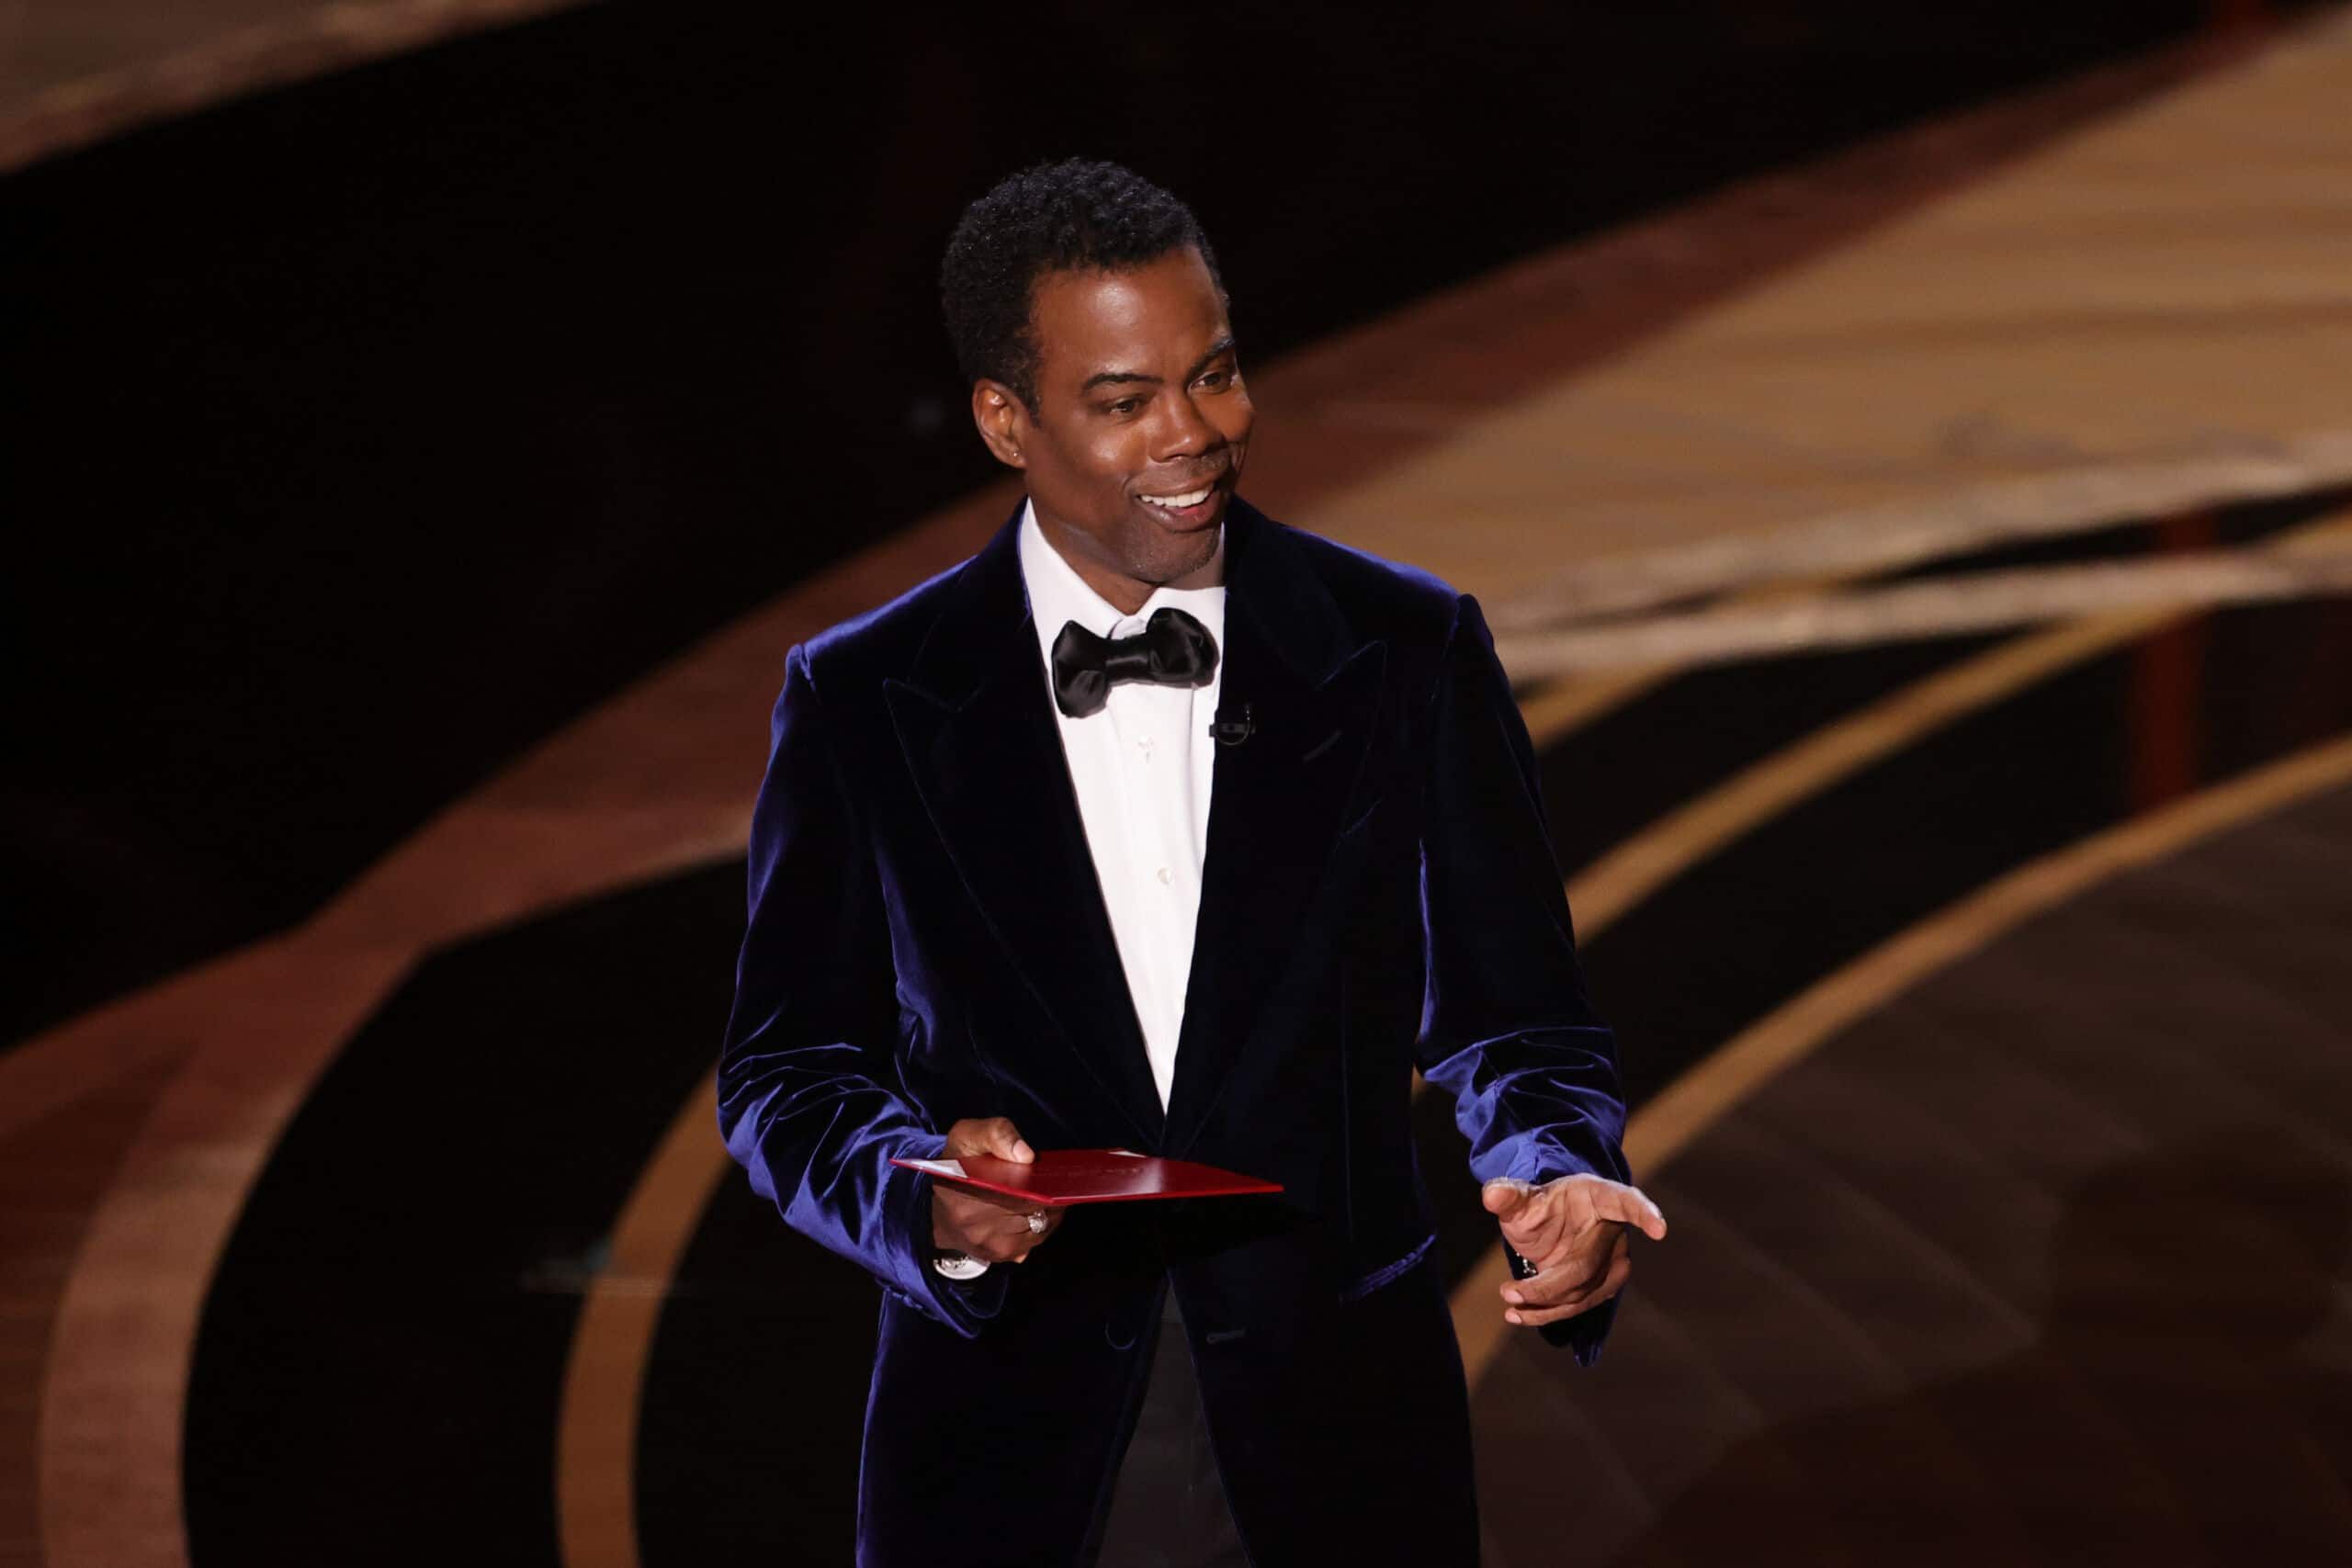 Chris Rock Addresses Will And Jada Pinkett-Smith In New Comedy Special